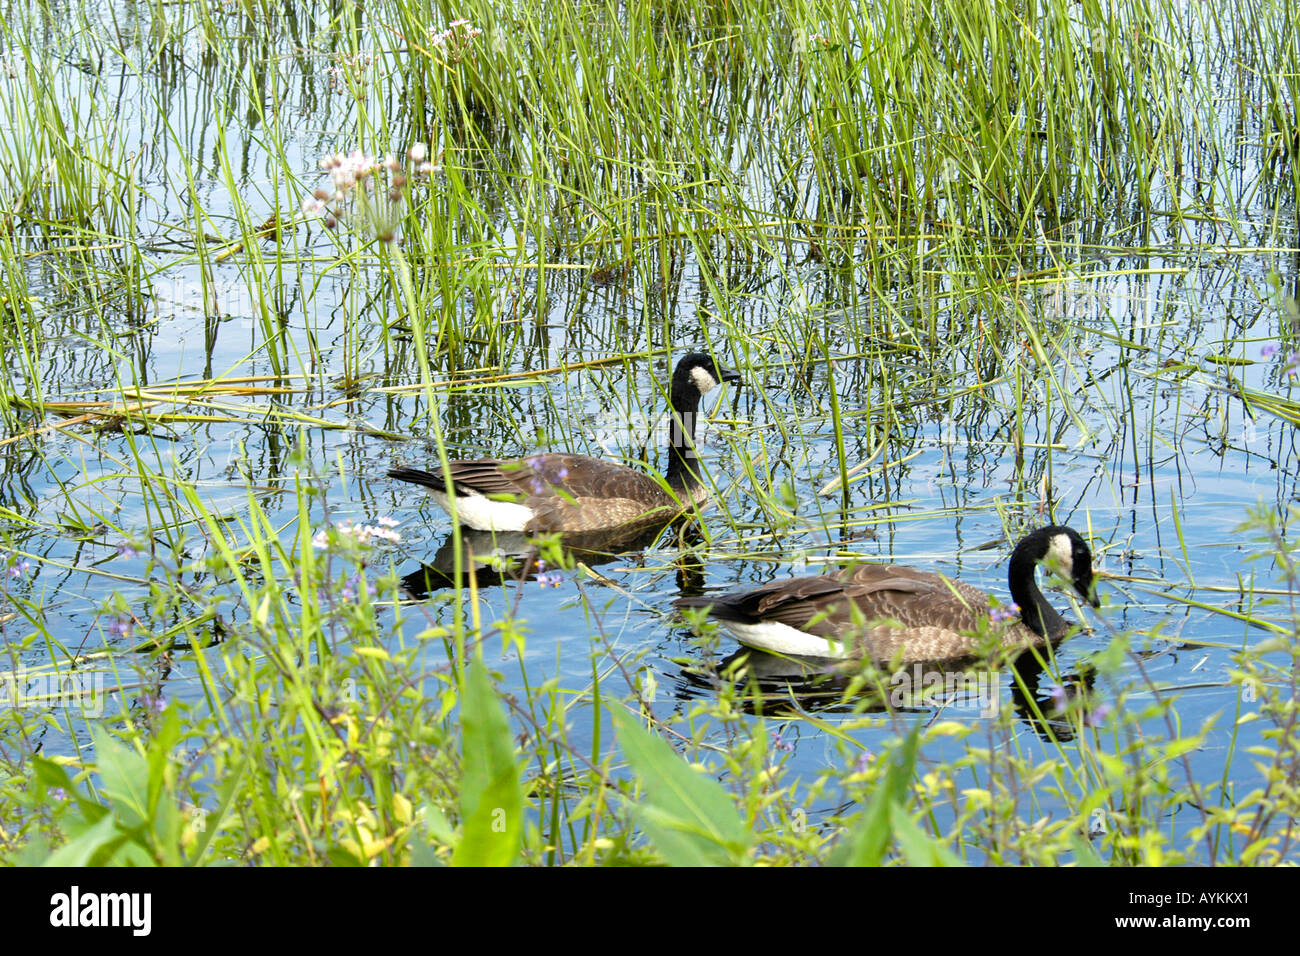 Canadian Geese at a wildlife refuge in the USA Stock Photo